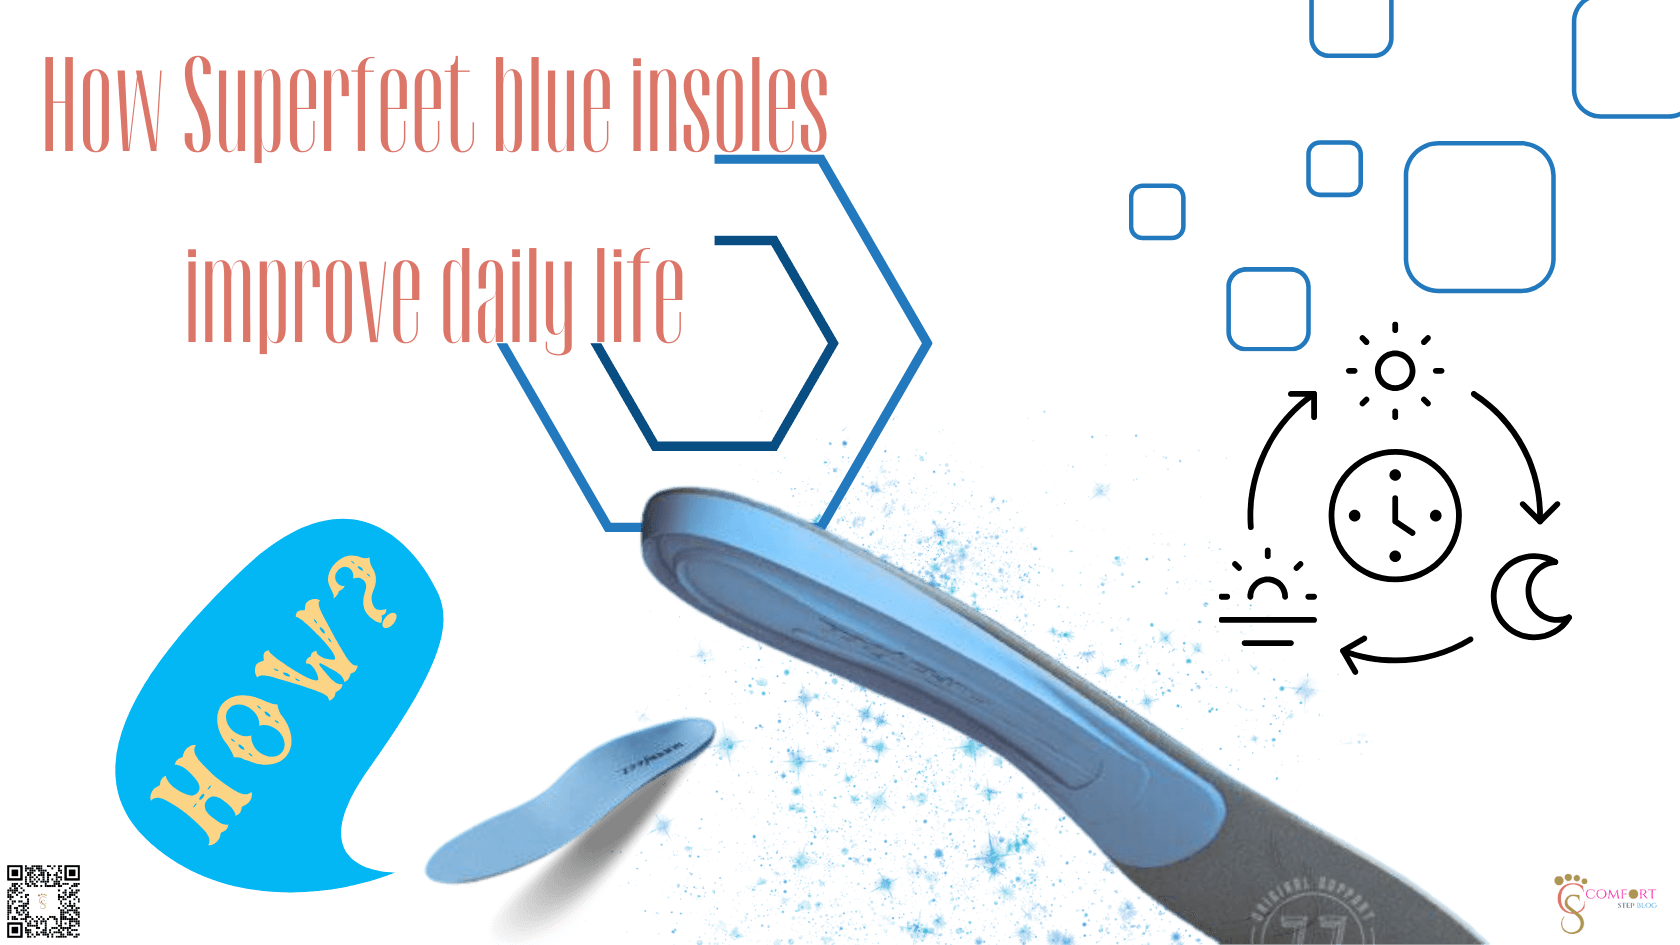 How Superfeet blue insoles improve daily life